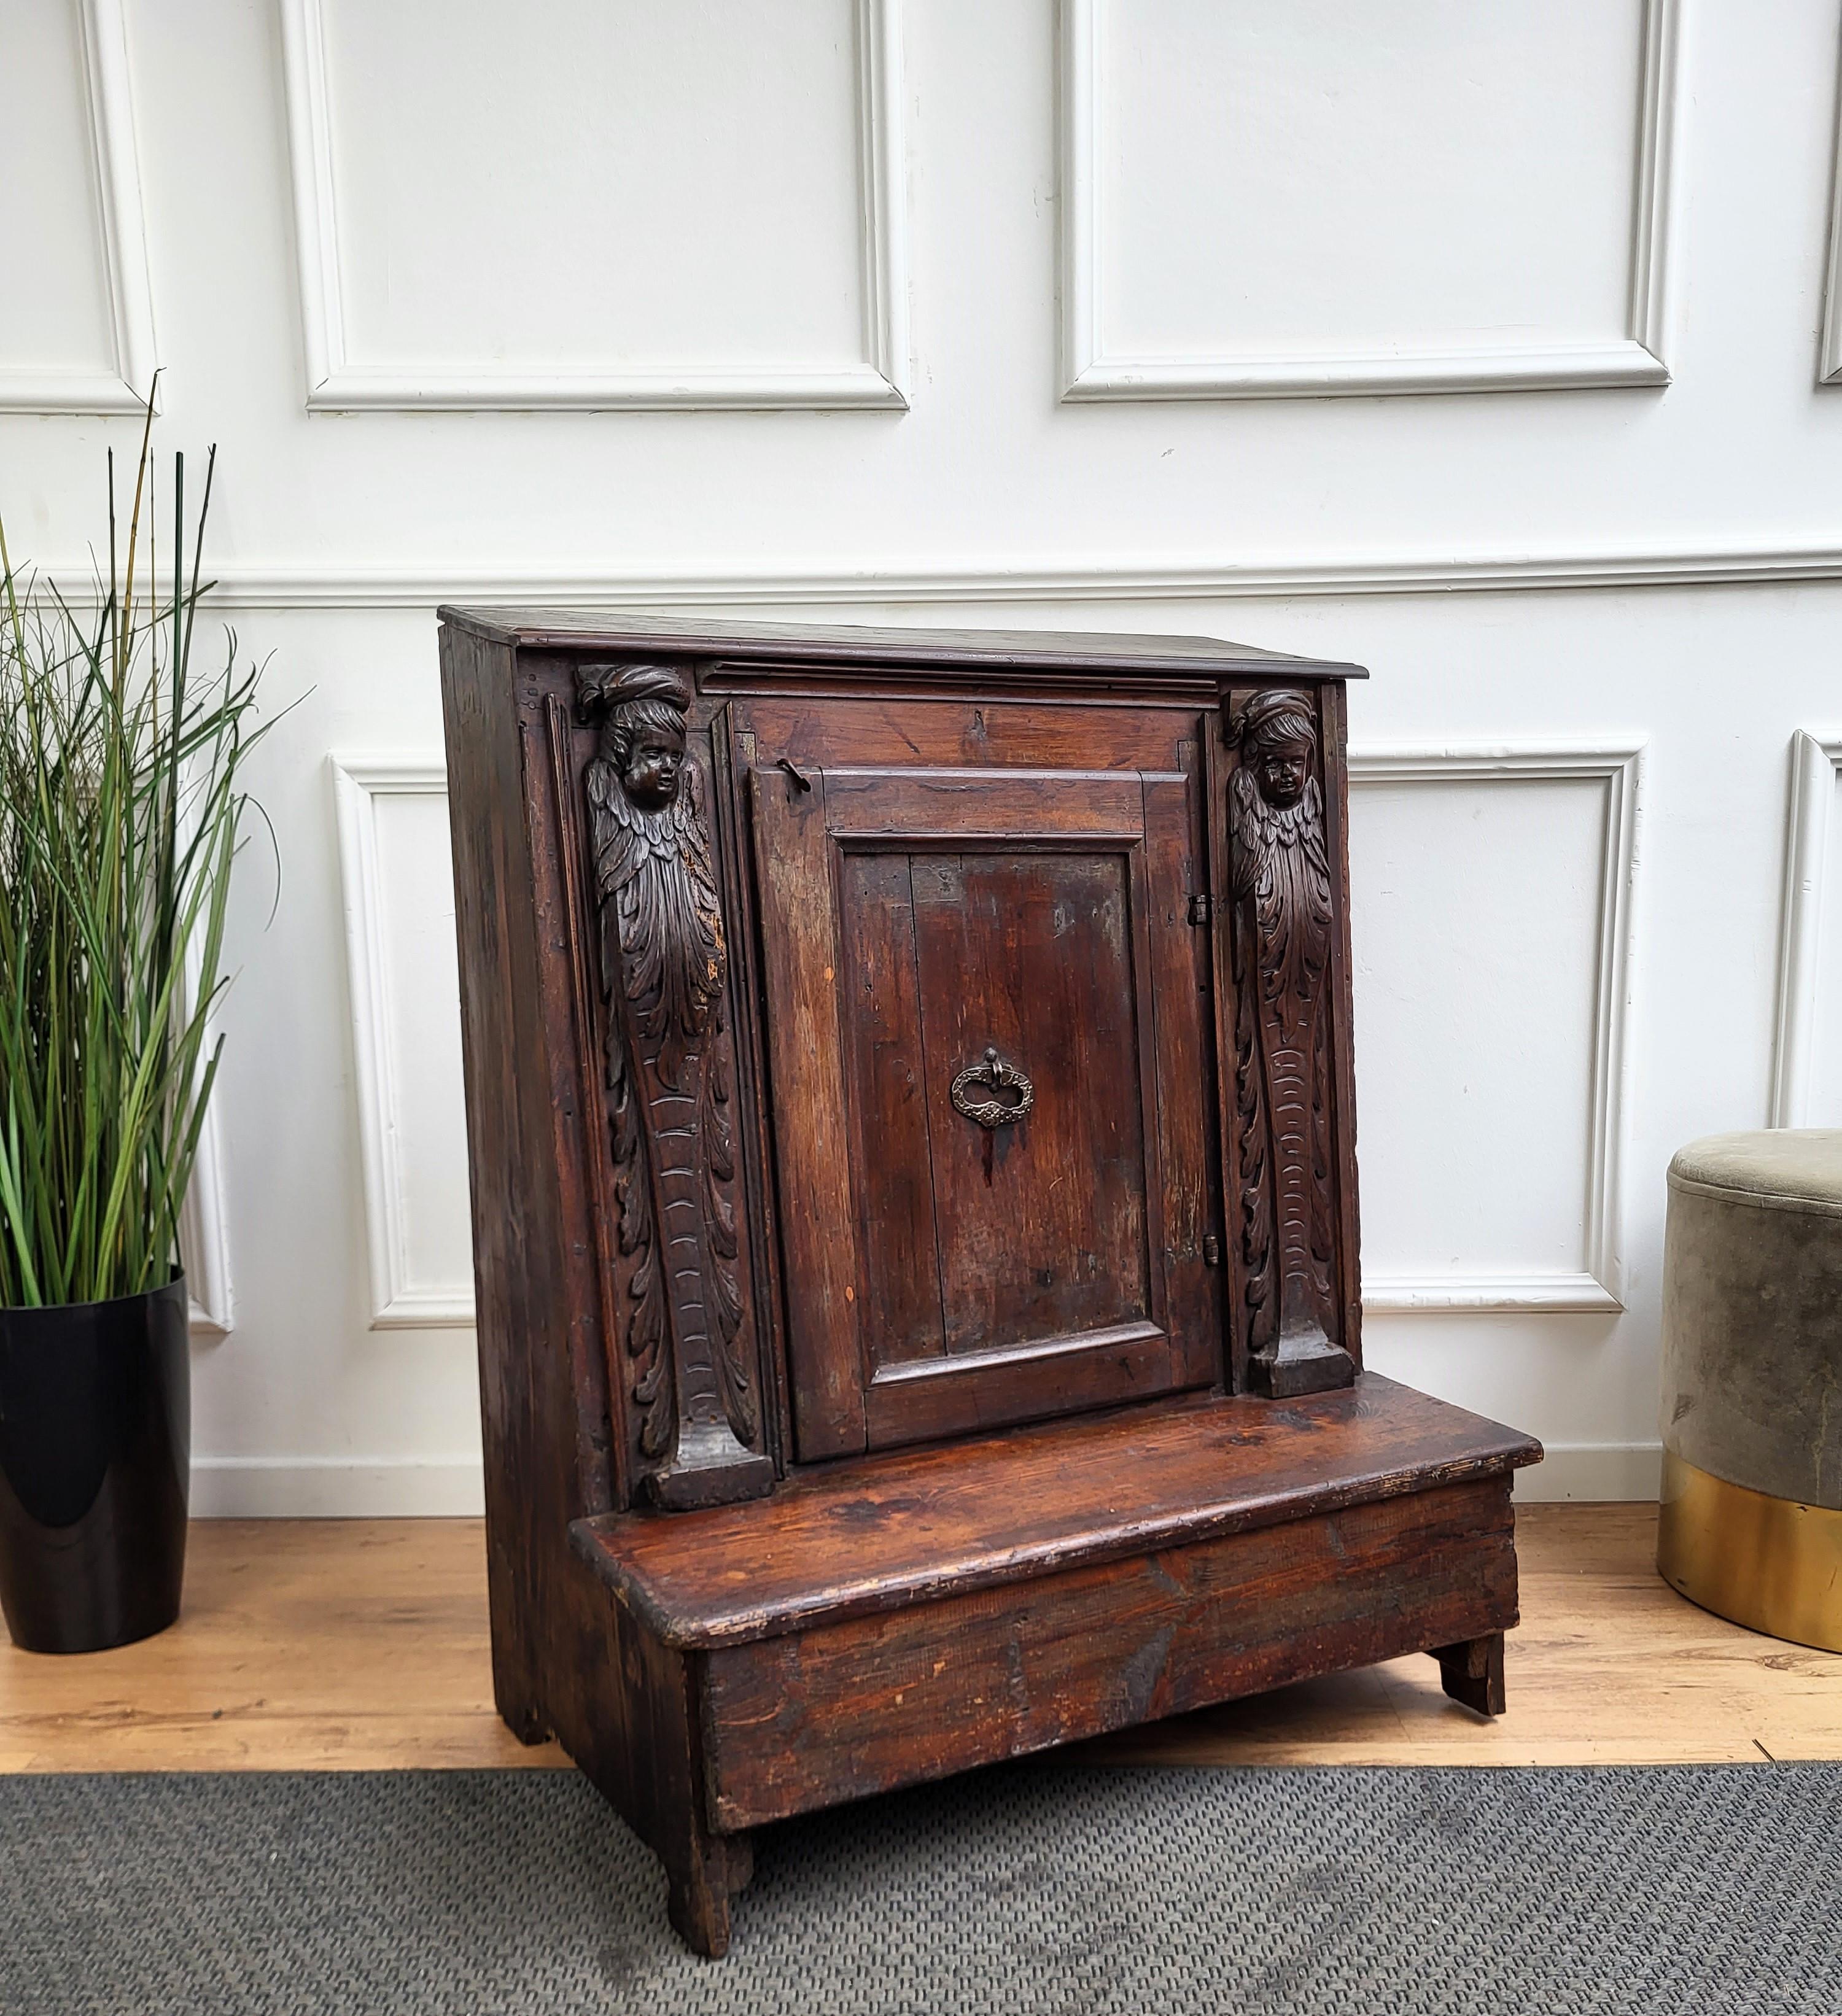 A good antique Italian Oratoire or Prie Dieu walnut cabinet crafted in beautiful wood, it stands on short legs over a knee resting platform base. The religious kneeler features two side carved columns with a central door with inside storage and the